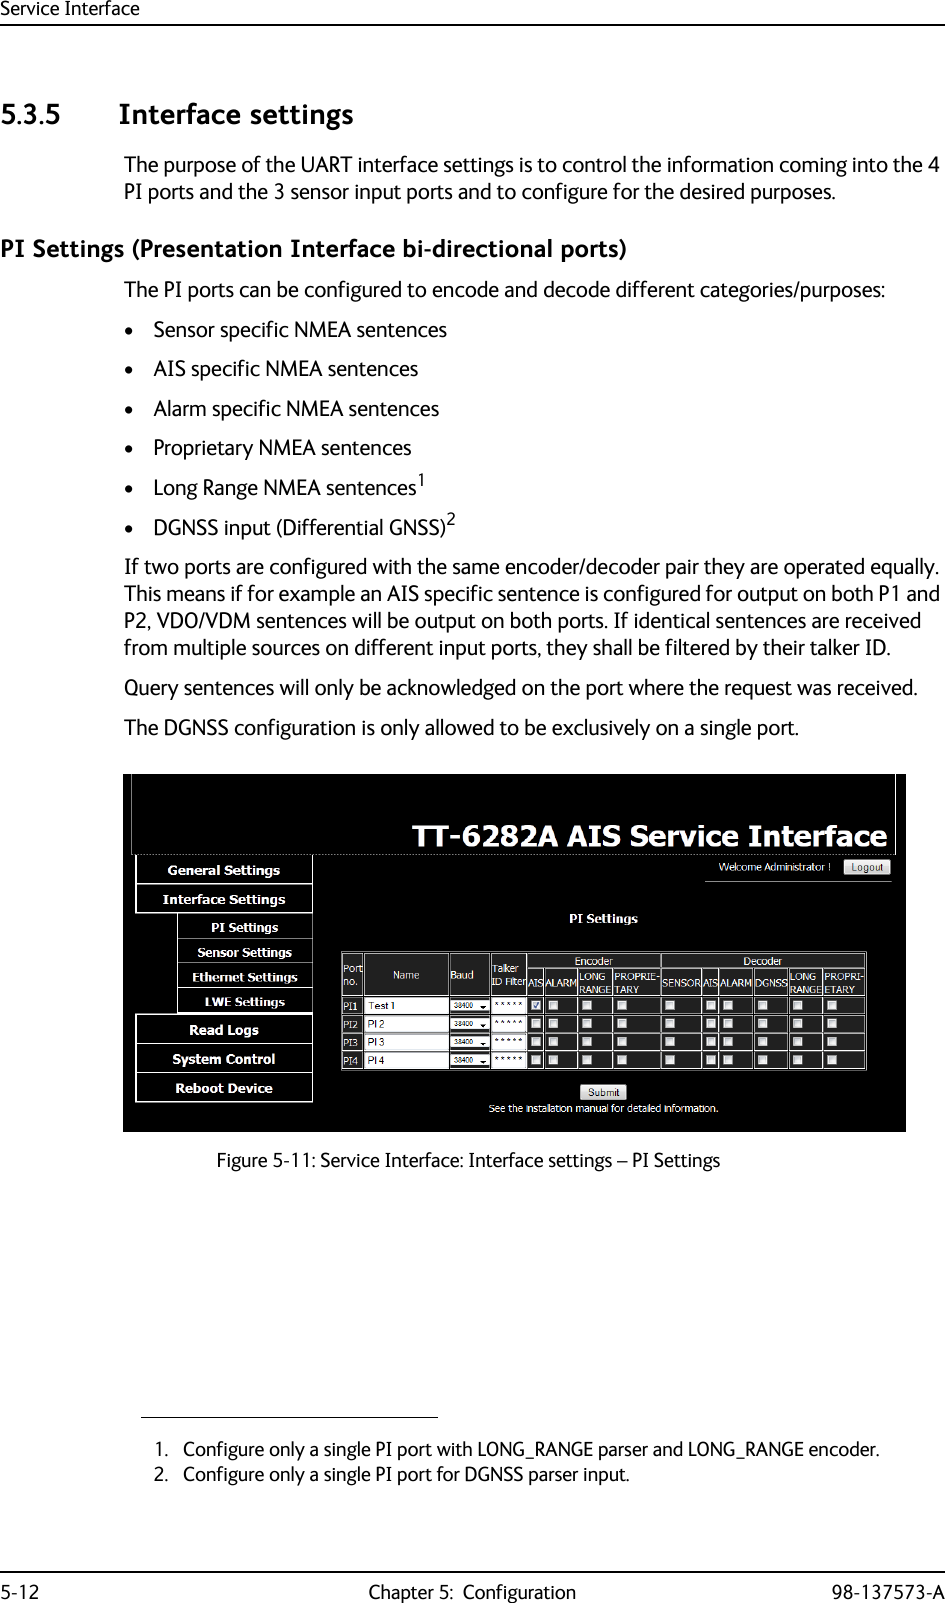 Service Interface5-12 Chapter 5:  Configuration 98-137573-A5.3.5 Interface settingsThe purpose of the UART interface settings is to control the information coming into the 4 PI ports and the 3 sensor input ports and to configure for the desired purposes.PI Settings (Presentation Interface bi-directional ports)The PI ports can be configured to encode and decode different categories/purposes:• Sensor specific NMEA sentences• AIS specific NMEA sentences• Alarm specific NMEA sentences• Proprietary NMEA sentences• Long Range NMEA sentences1• DGNSS input (Differential GNSS)2If two ports are configured with the same encoder/decoder pair they are operated equally. This means if for example an AIS specific sentence is configured for output on both P1 and P2, VDO/VDM sentences will be output on both ports. If identical sentences are received from multiple sources on different input ports, they shall be filtered by their talker ID.Query sentences will only be acknowledged on the port where the request was received.The DGNSS configuration is only allowed to be exclusively on a single port.1. Configure only a single PI port with LONG_RANGE parser and LONG_RANGE encoder.2. Configure only a single PI port for DGNSS parser input.Figure 5-11: Service Interface: Interface settings – PI Settings